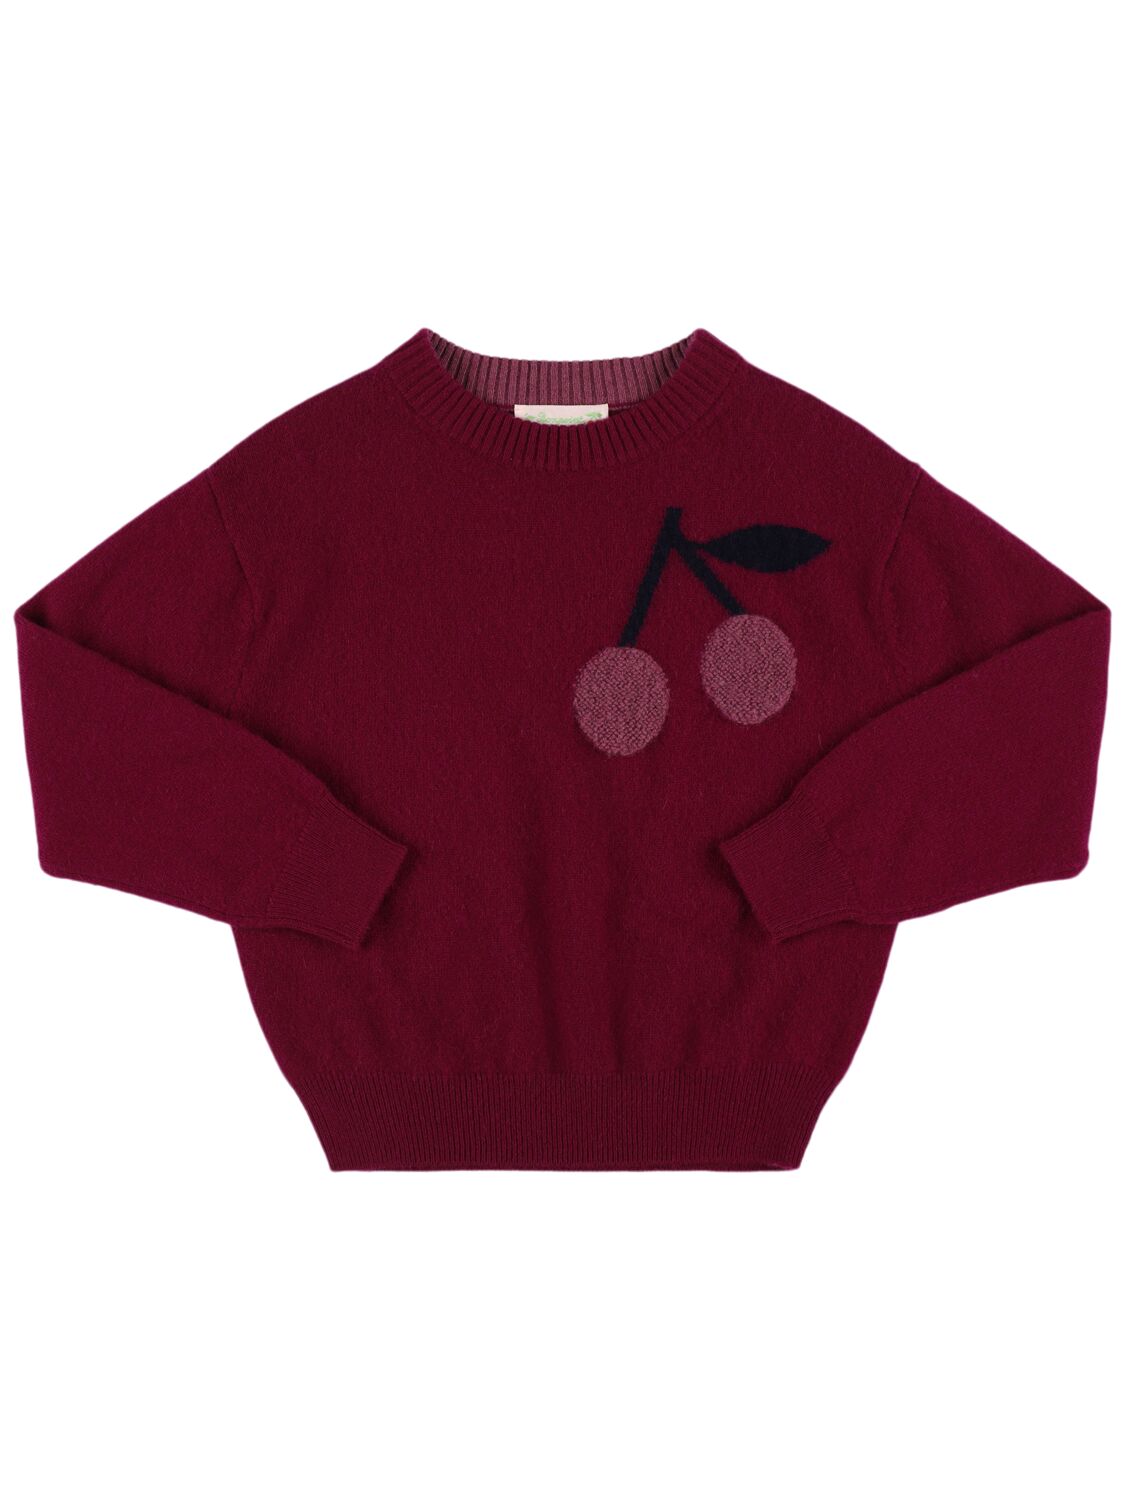 Bonpoint Jacquard Cashmere Knit Sweater In Burgundy